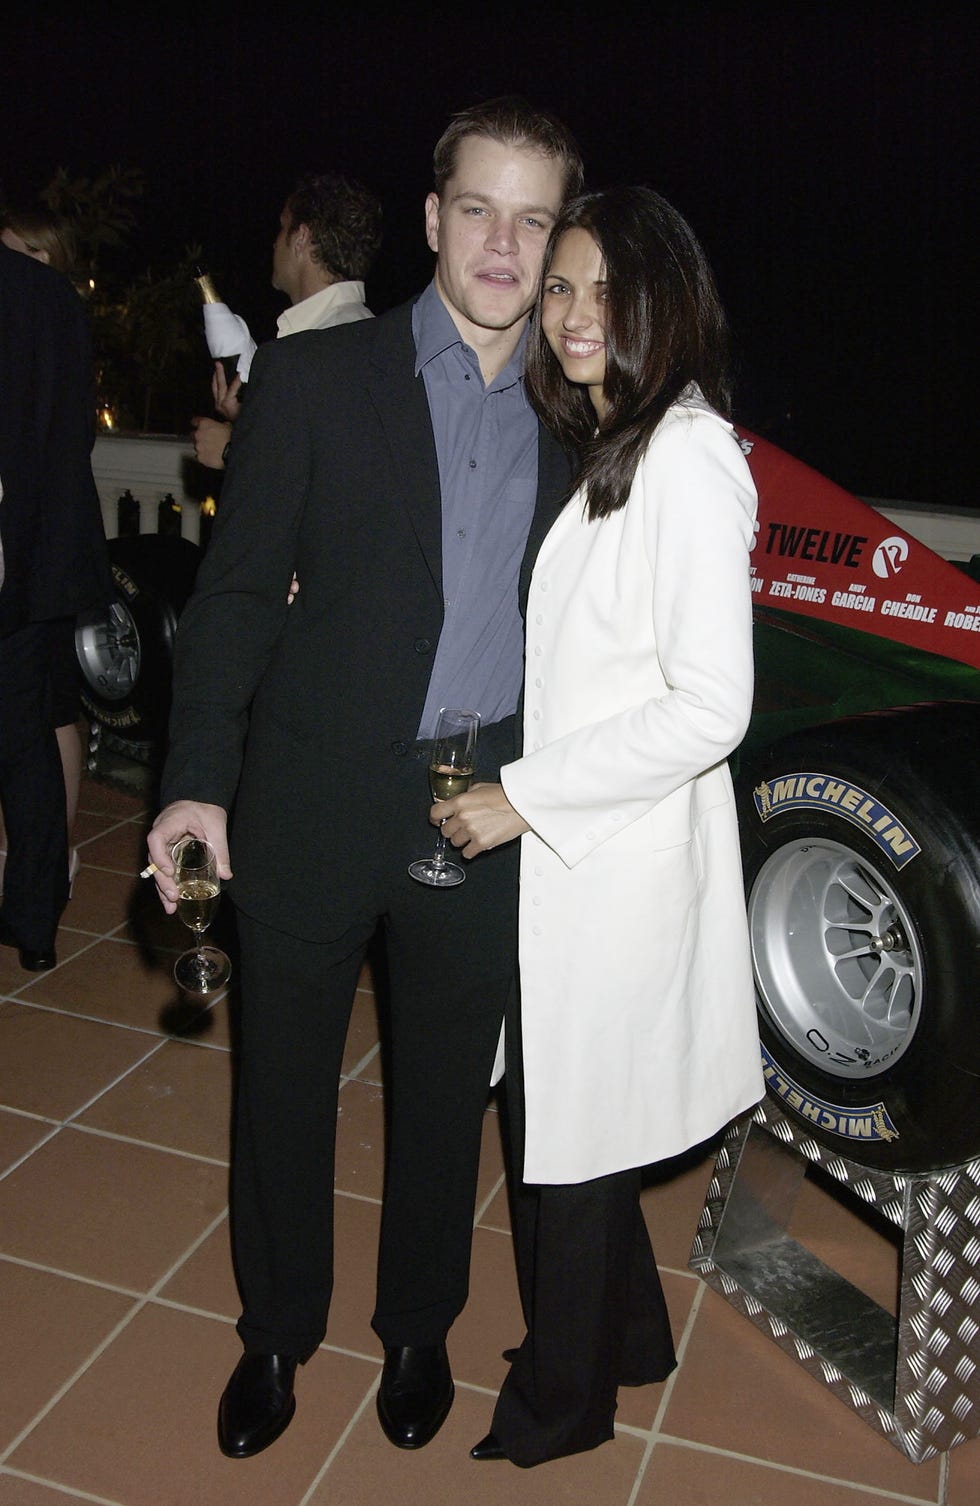 Who Is Matt Damon's Wife? 7 Facts About Luciana Barroso